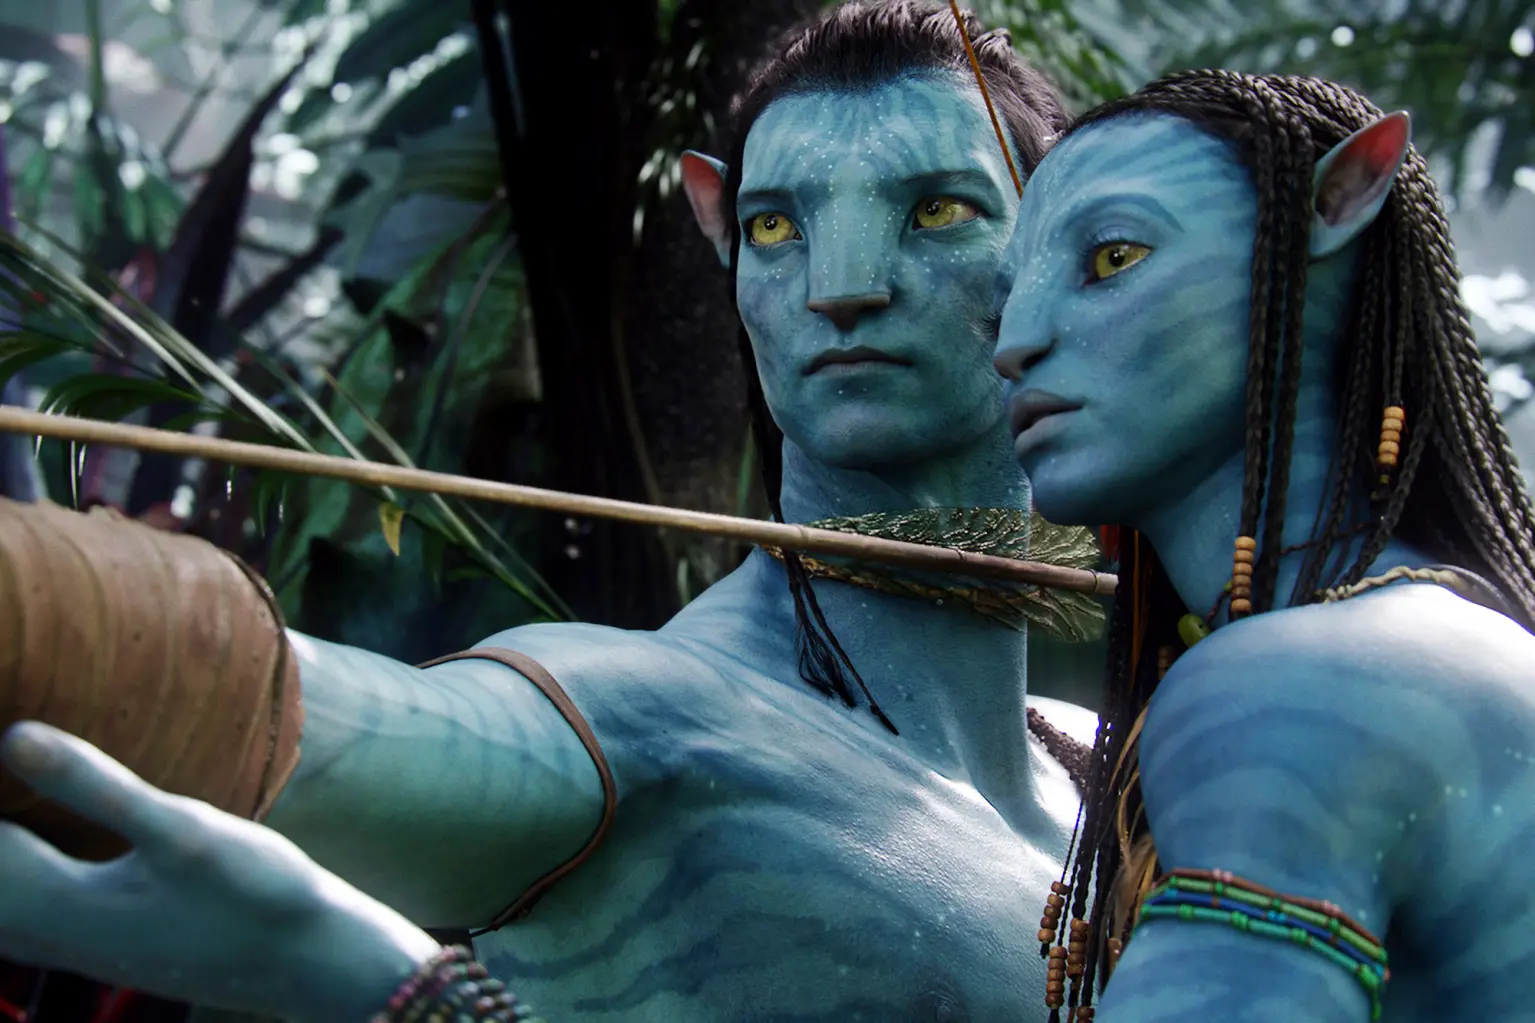 Avatar The Way of Water review - don't miss it in theaters